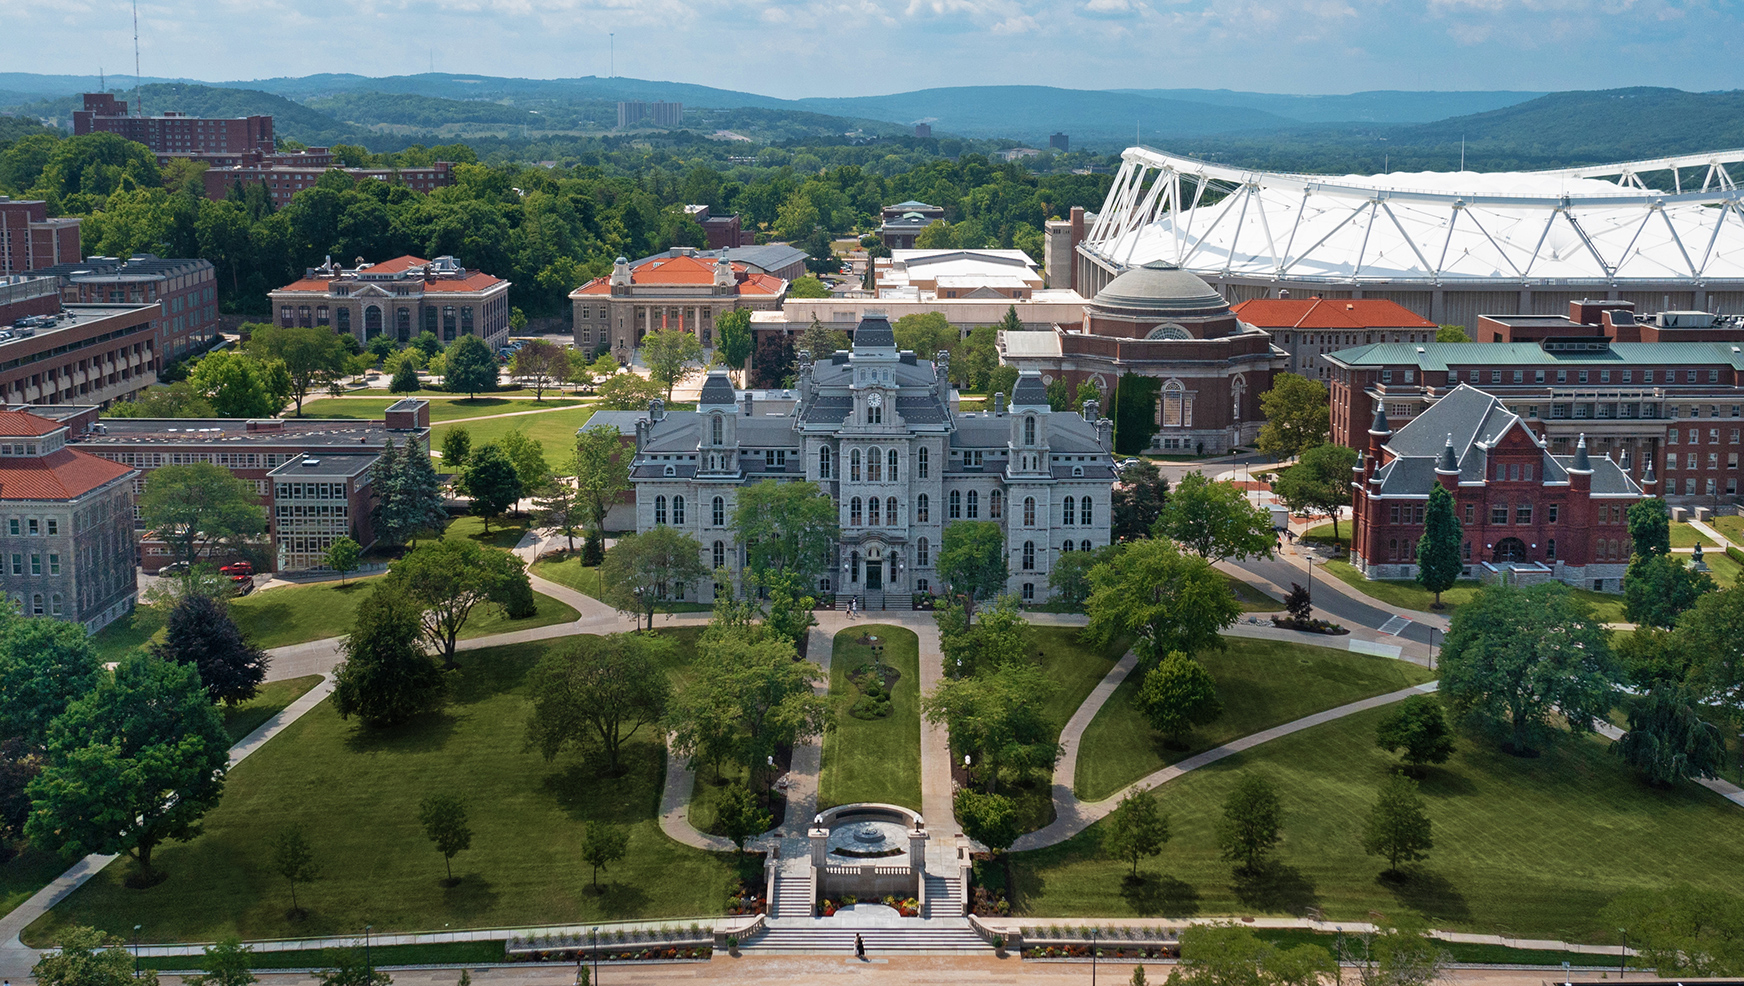 Drone photo of Syracuse University Campus with Hall of Languages in the center